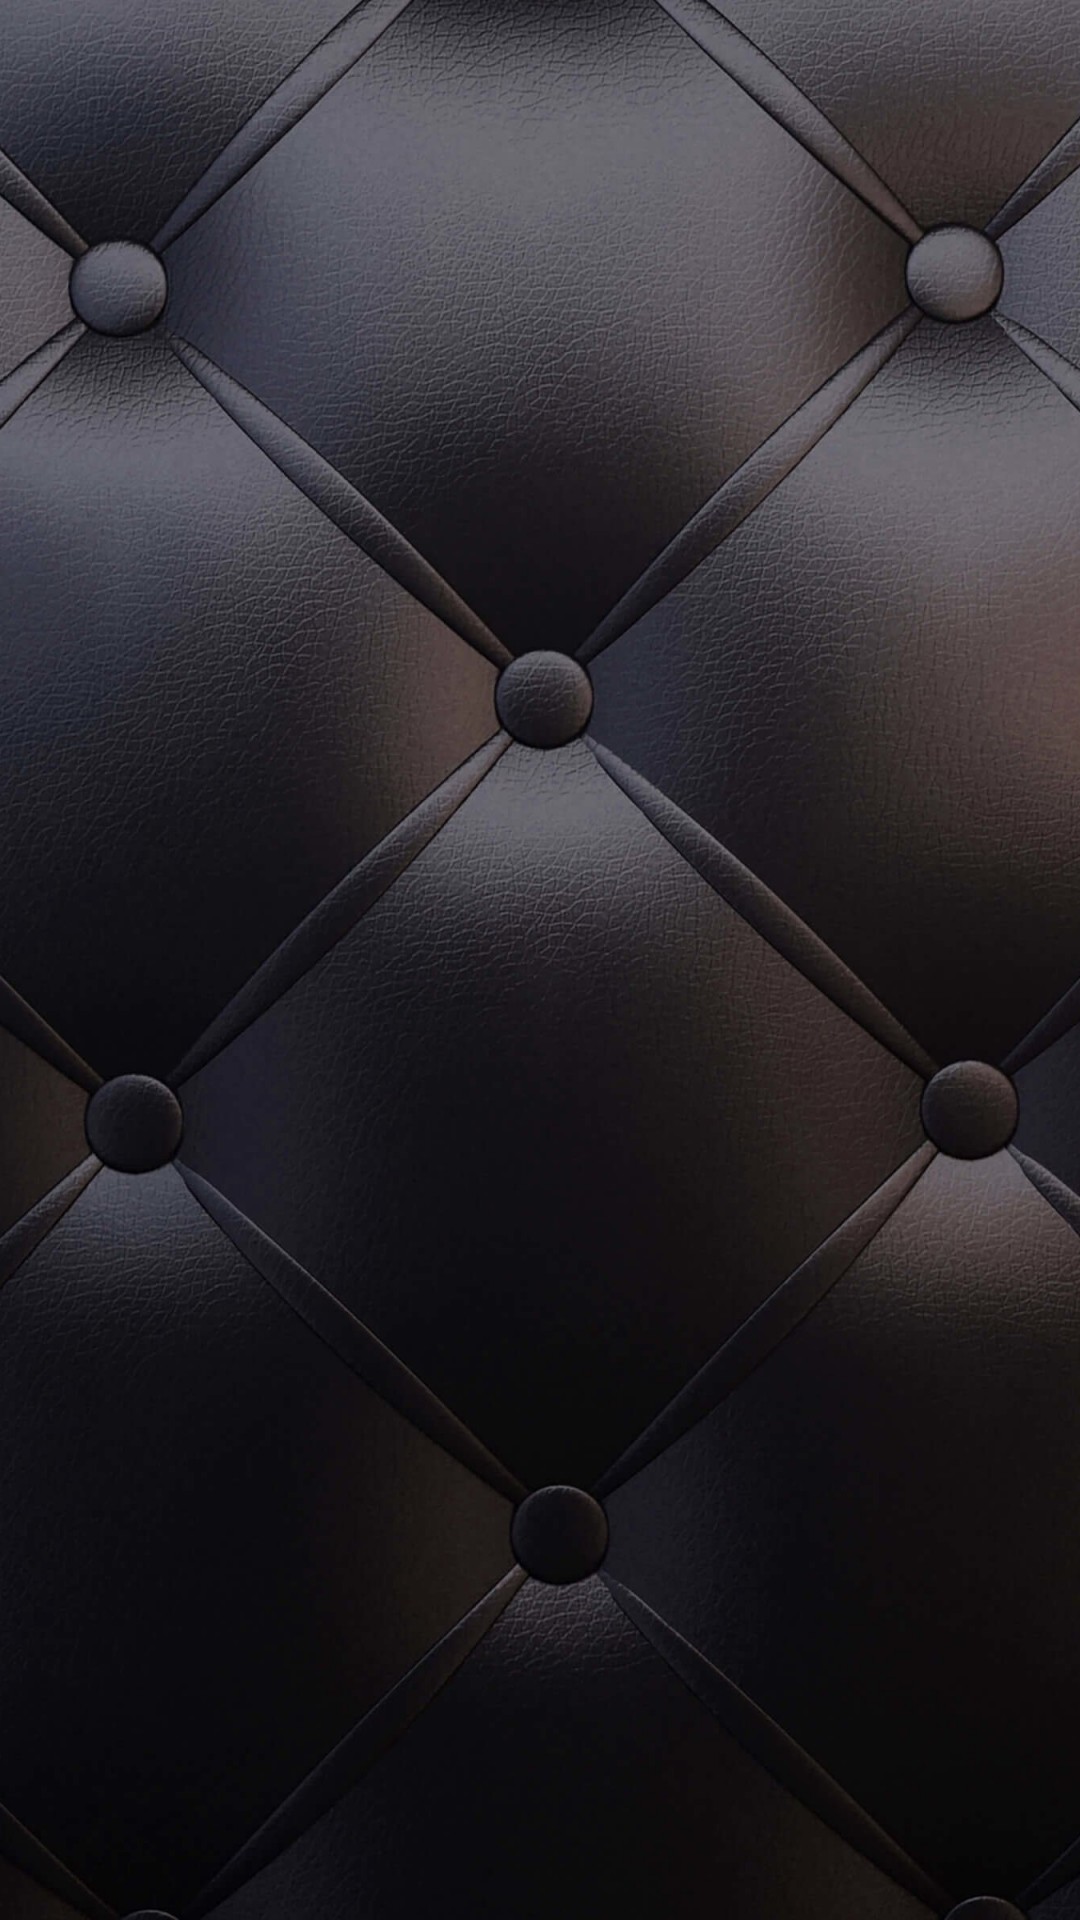 Black Leather Vintage Sofa Wallpaper for SONY Xperia Z3